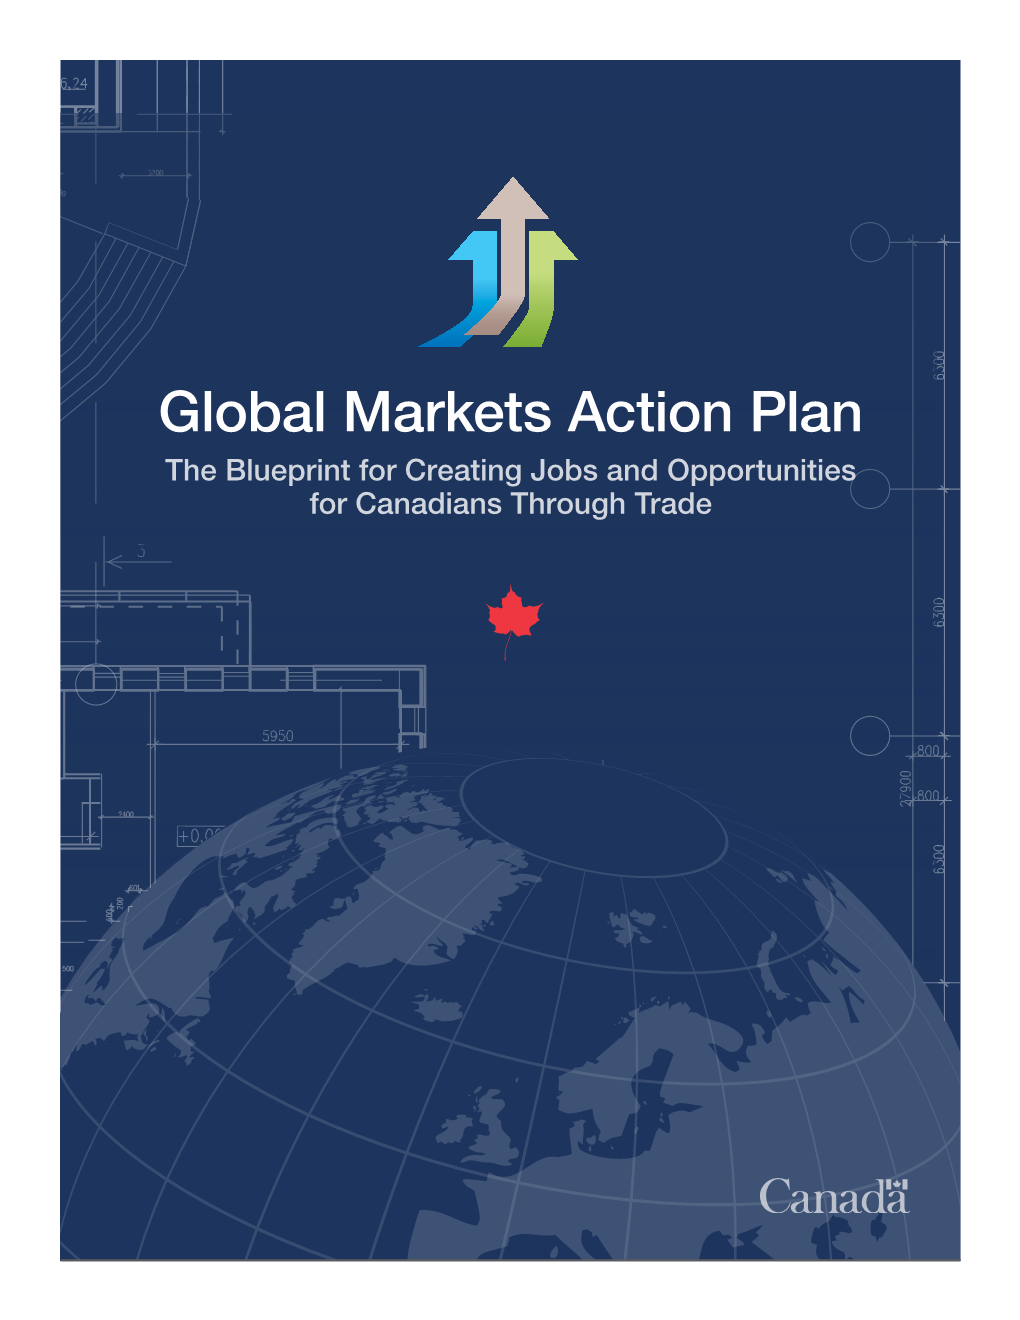 Global Markets Action Plan the Blueprint for Creating Jobs and Opportunities for Canadians Through Trade © Her Majesty the Queen in Right of Canada, 2013